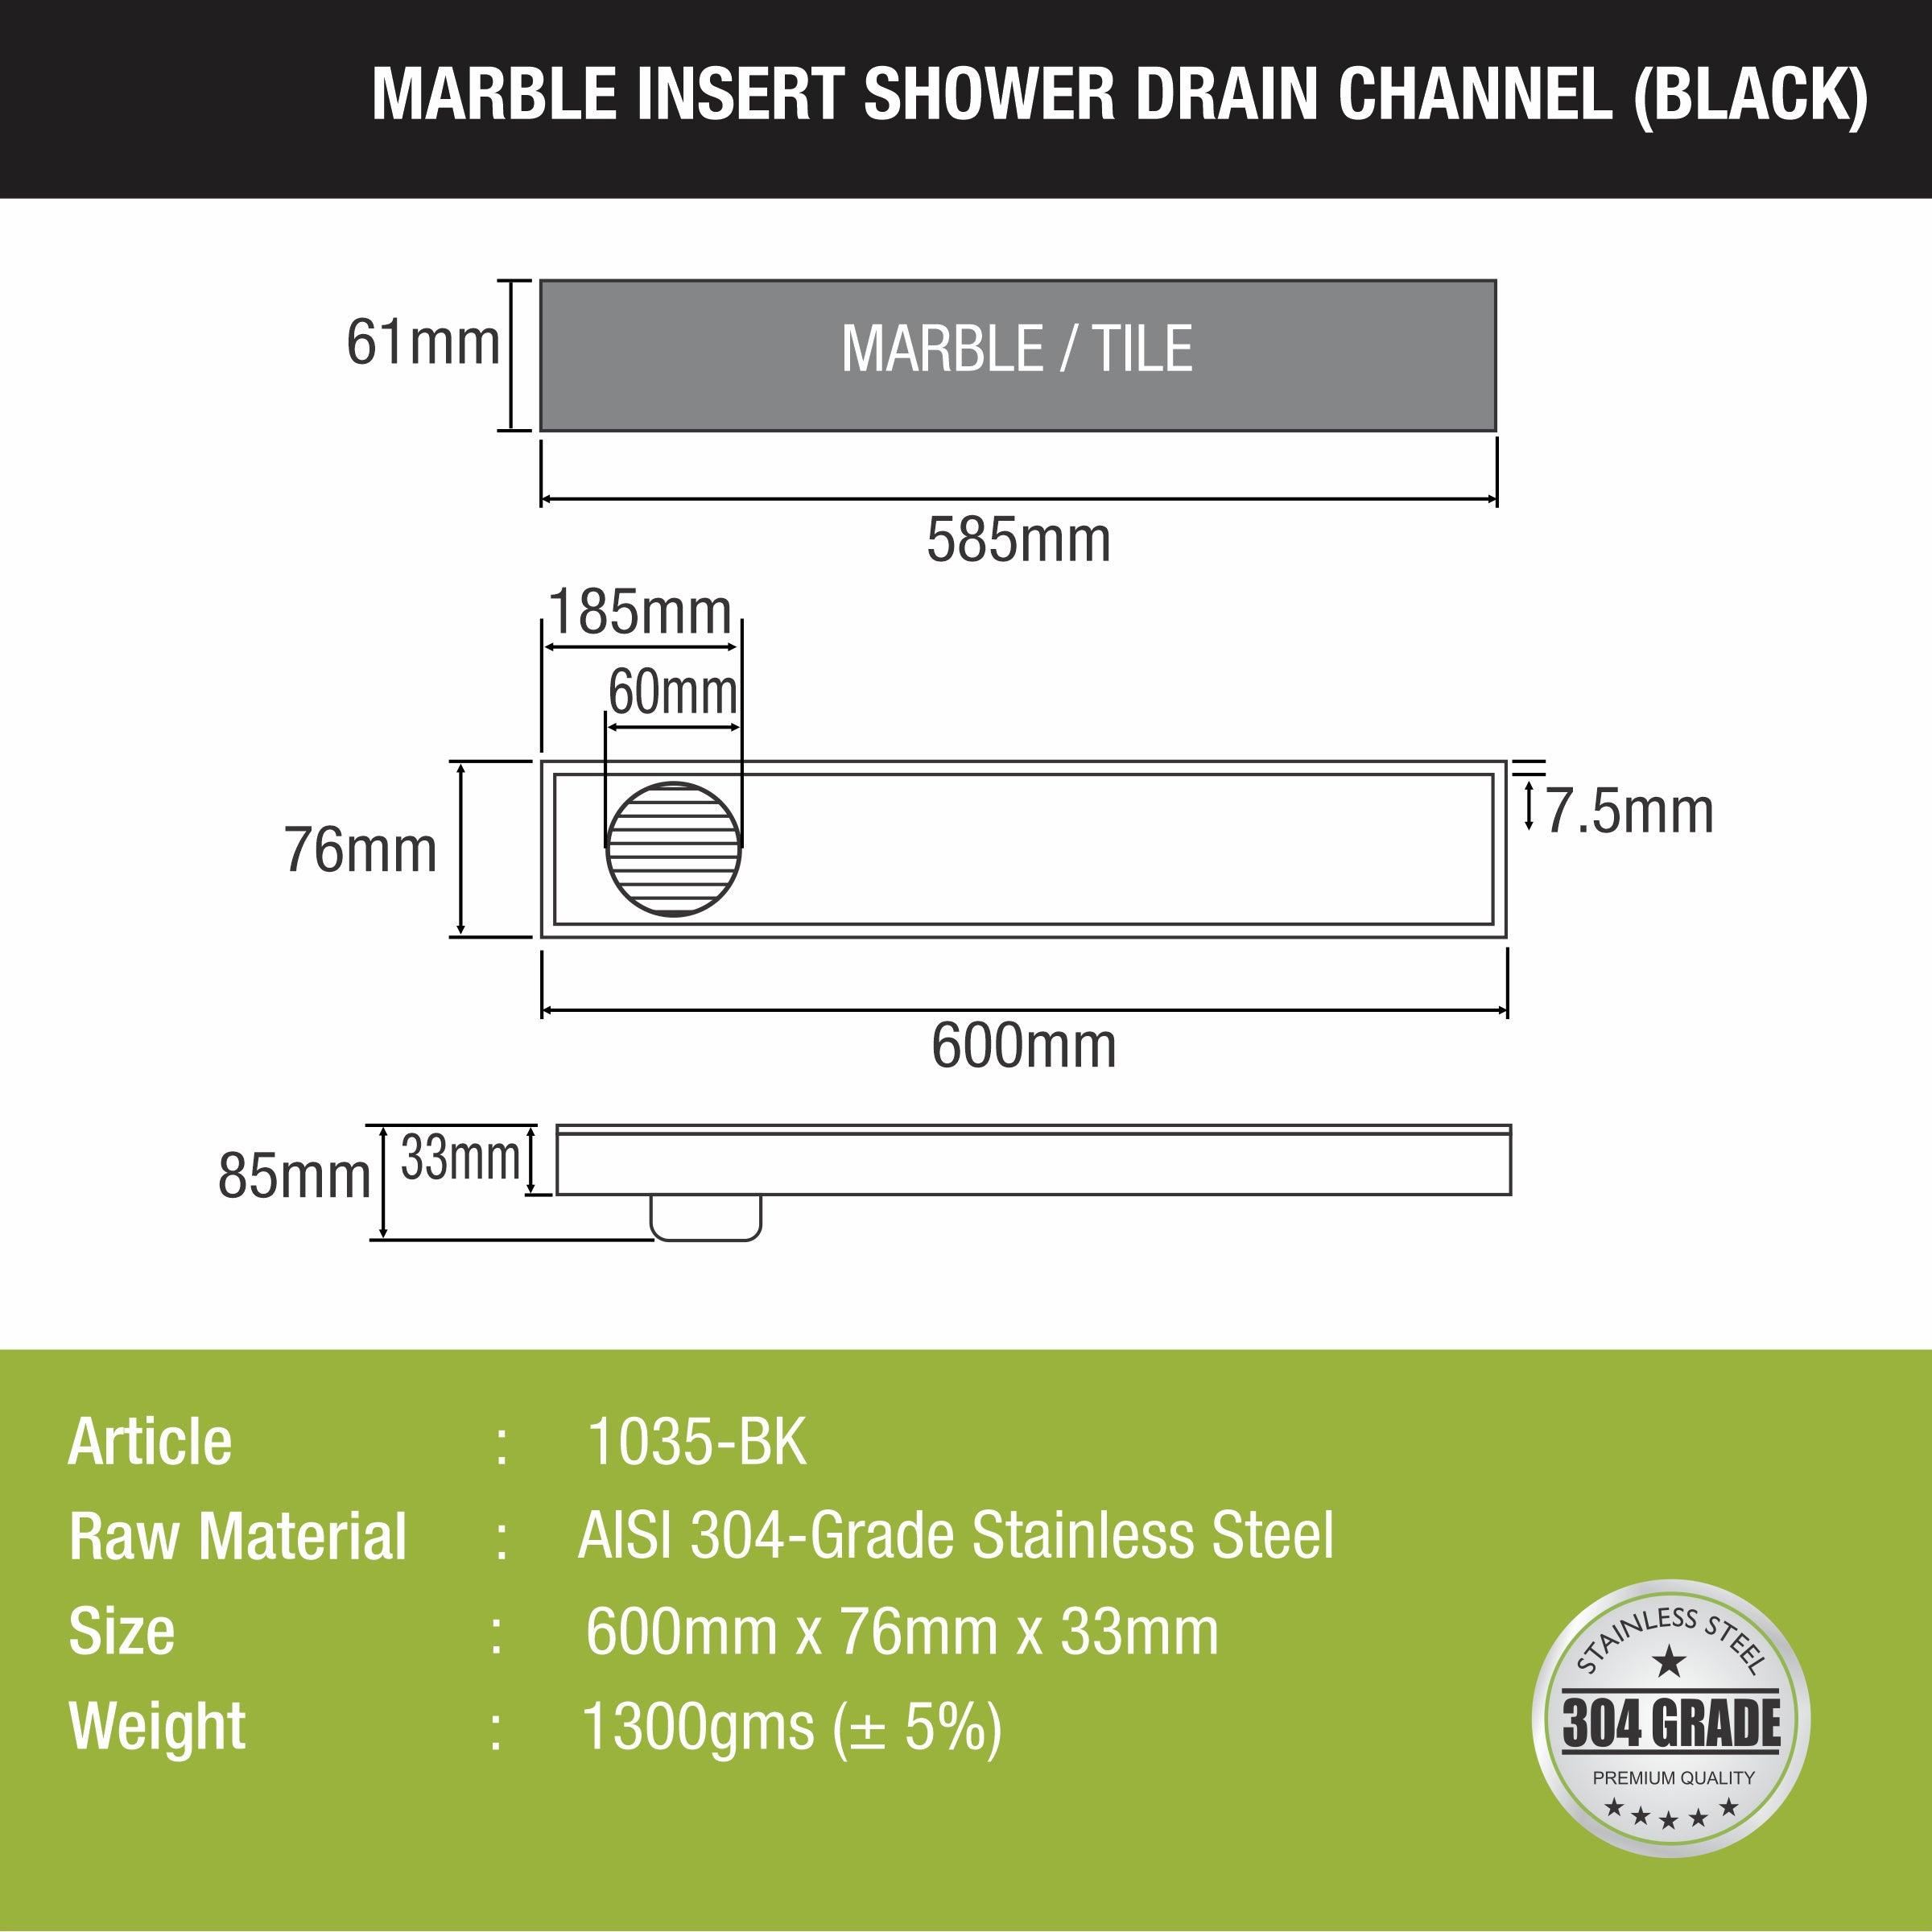 Marble Insert Shower Drain Channel - Black (24 x 3 Inches) size and measurement